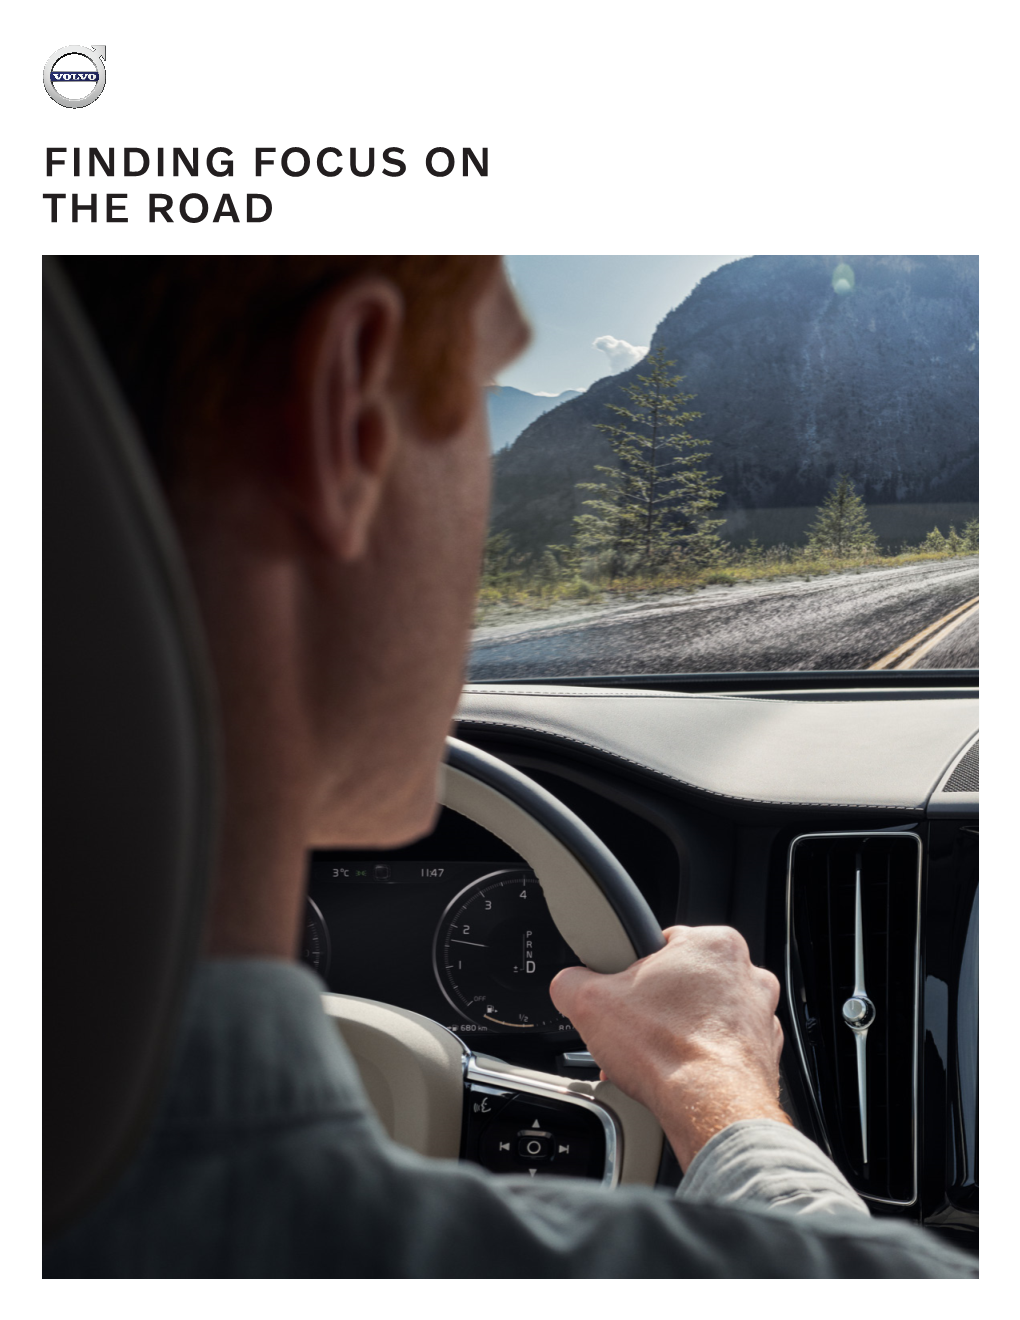 Finding Focus on the Road Introduction